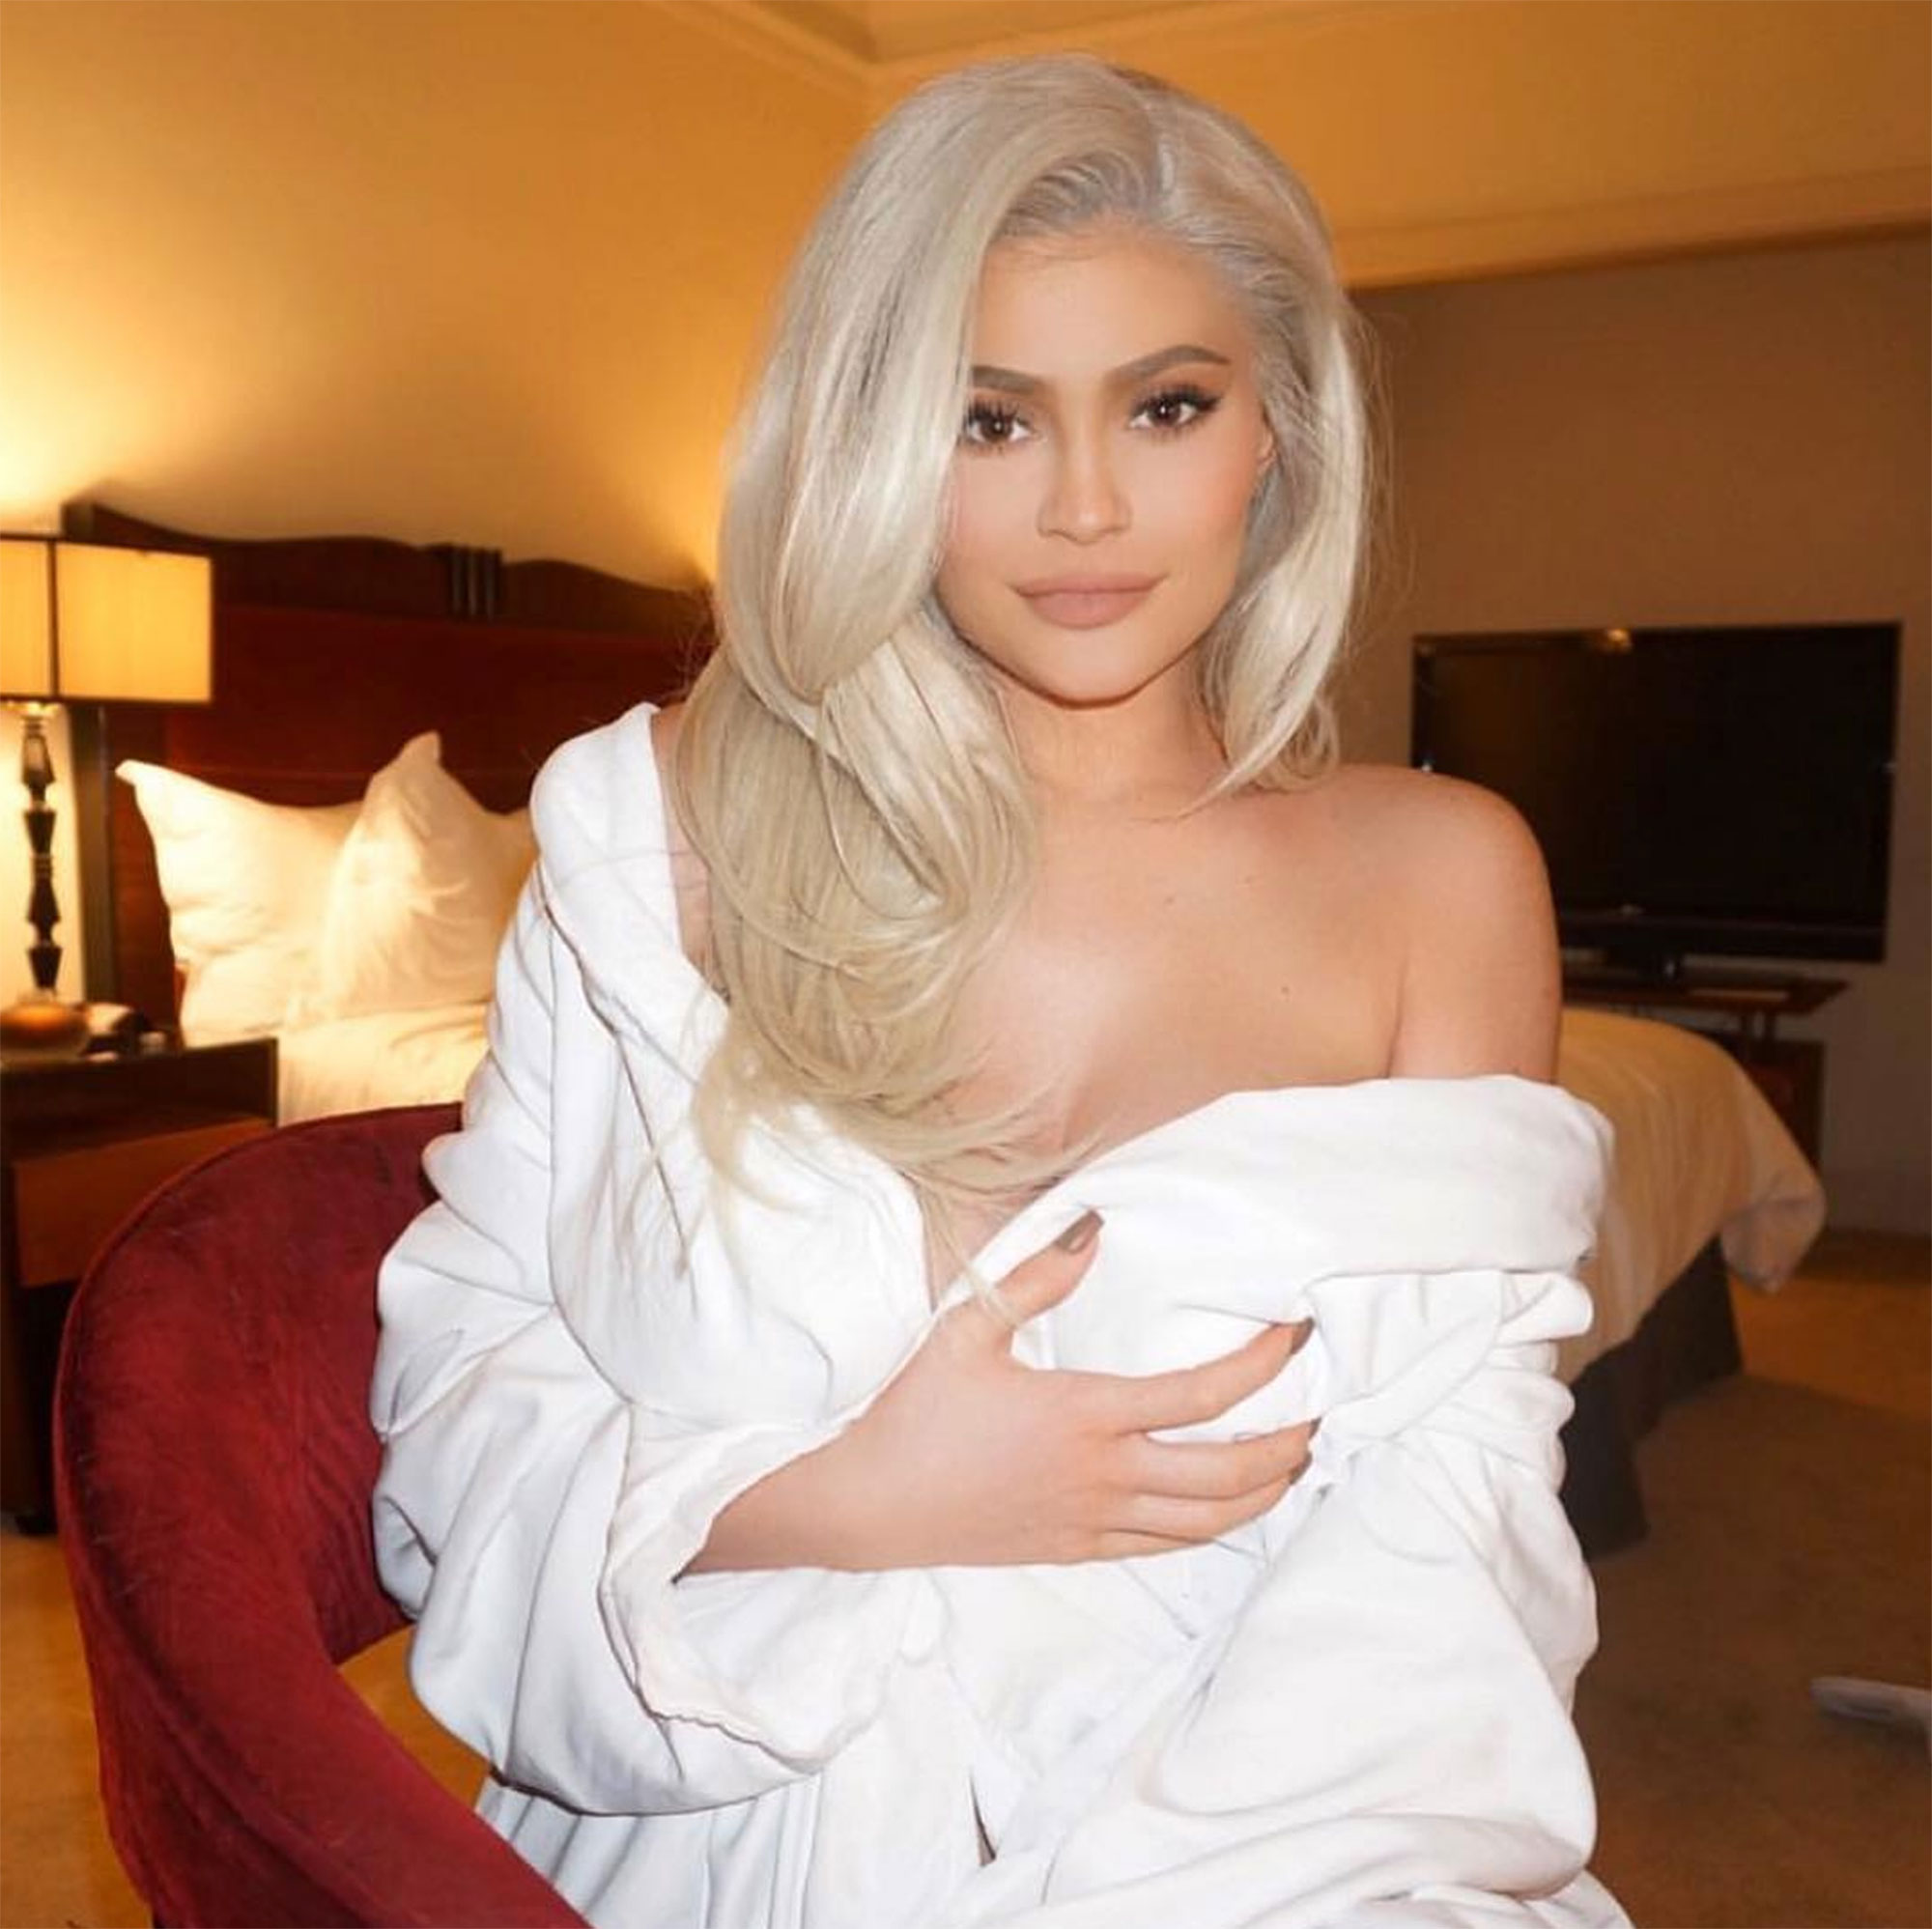 Did New Mom Kylie Jenner Just Dye Her Hair Blonde? | PEOPLE.com